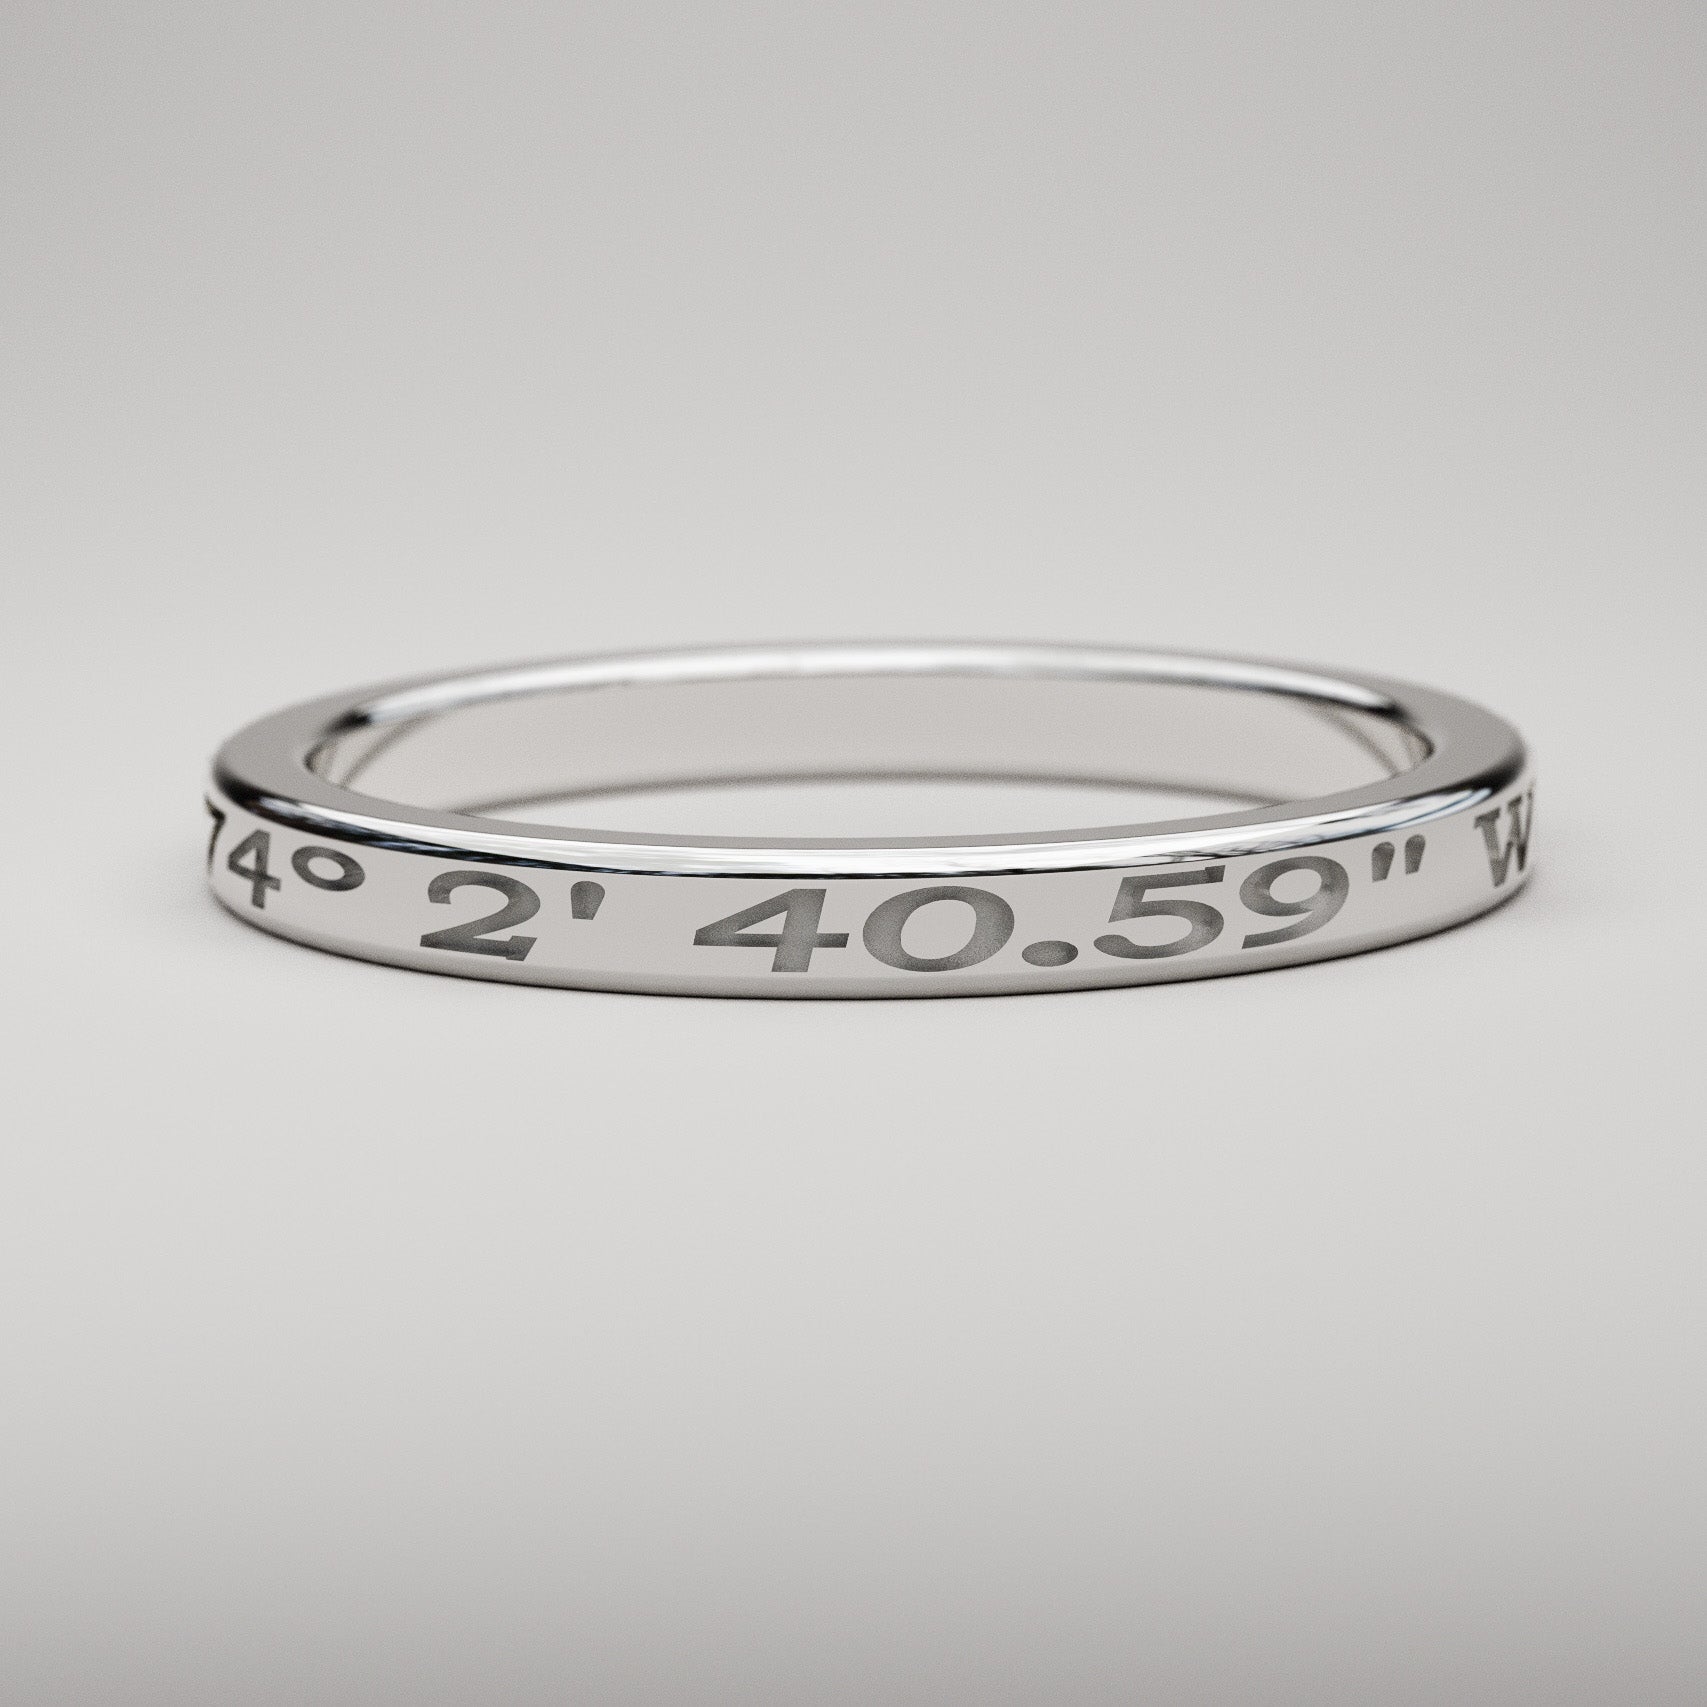 Custom coordinates ring in white gold, 2mm wide